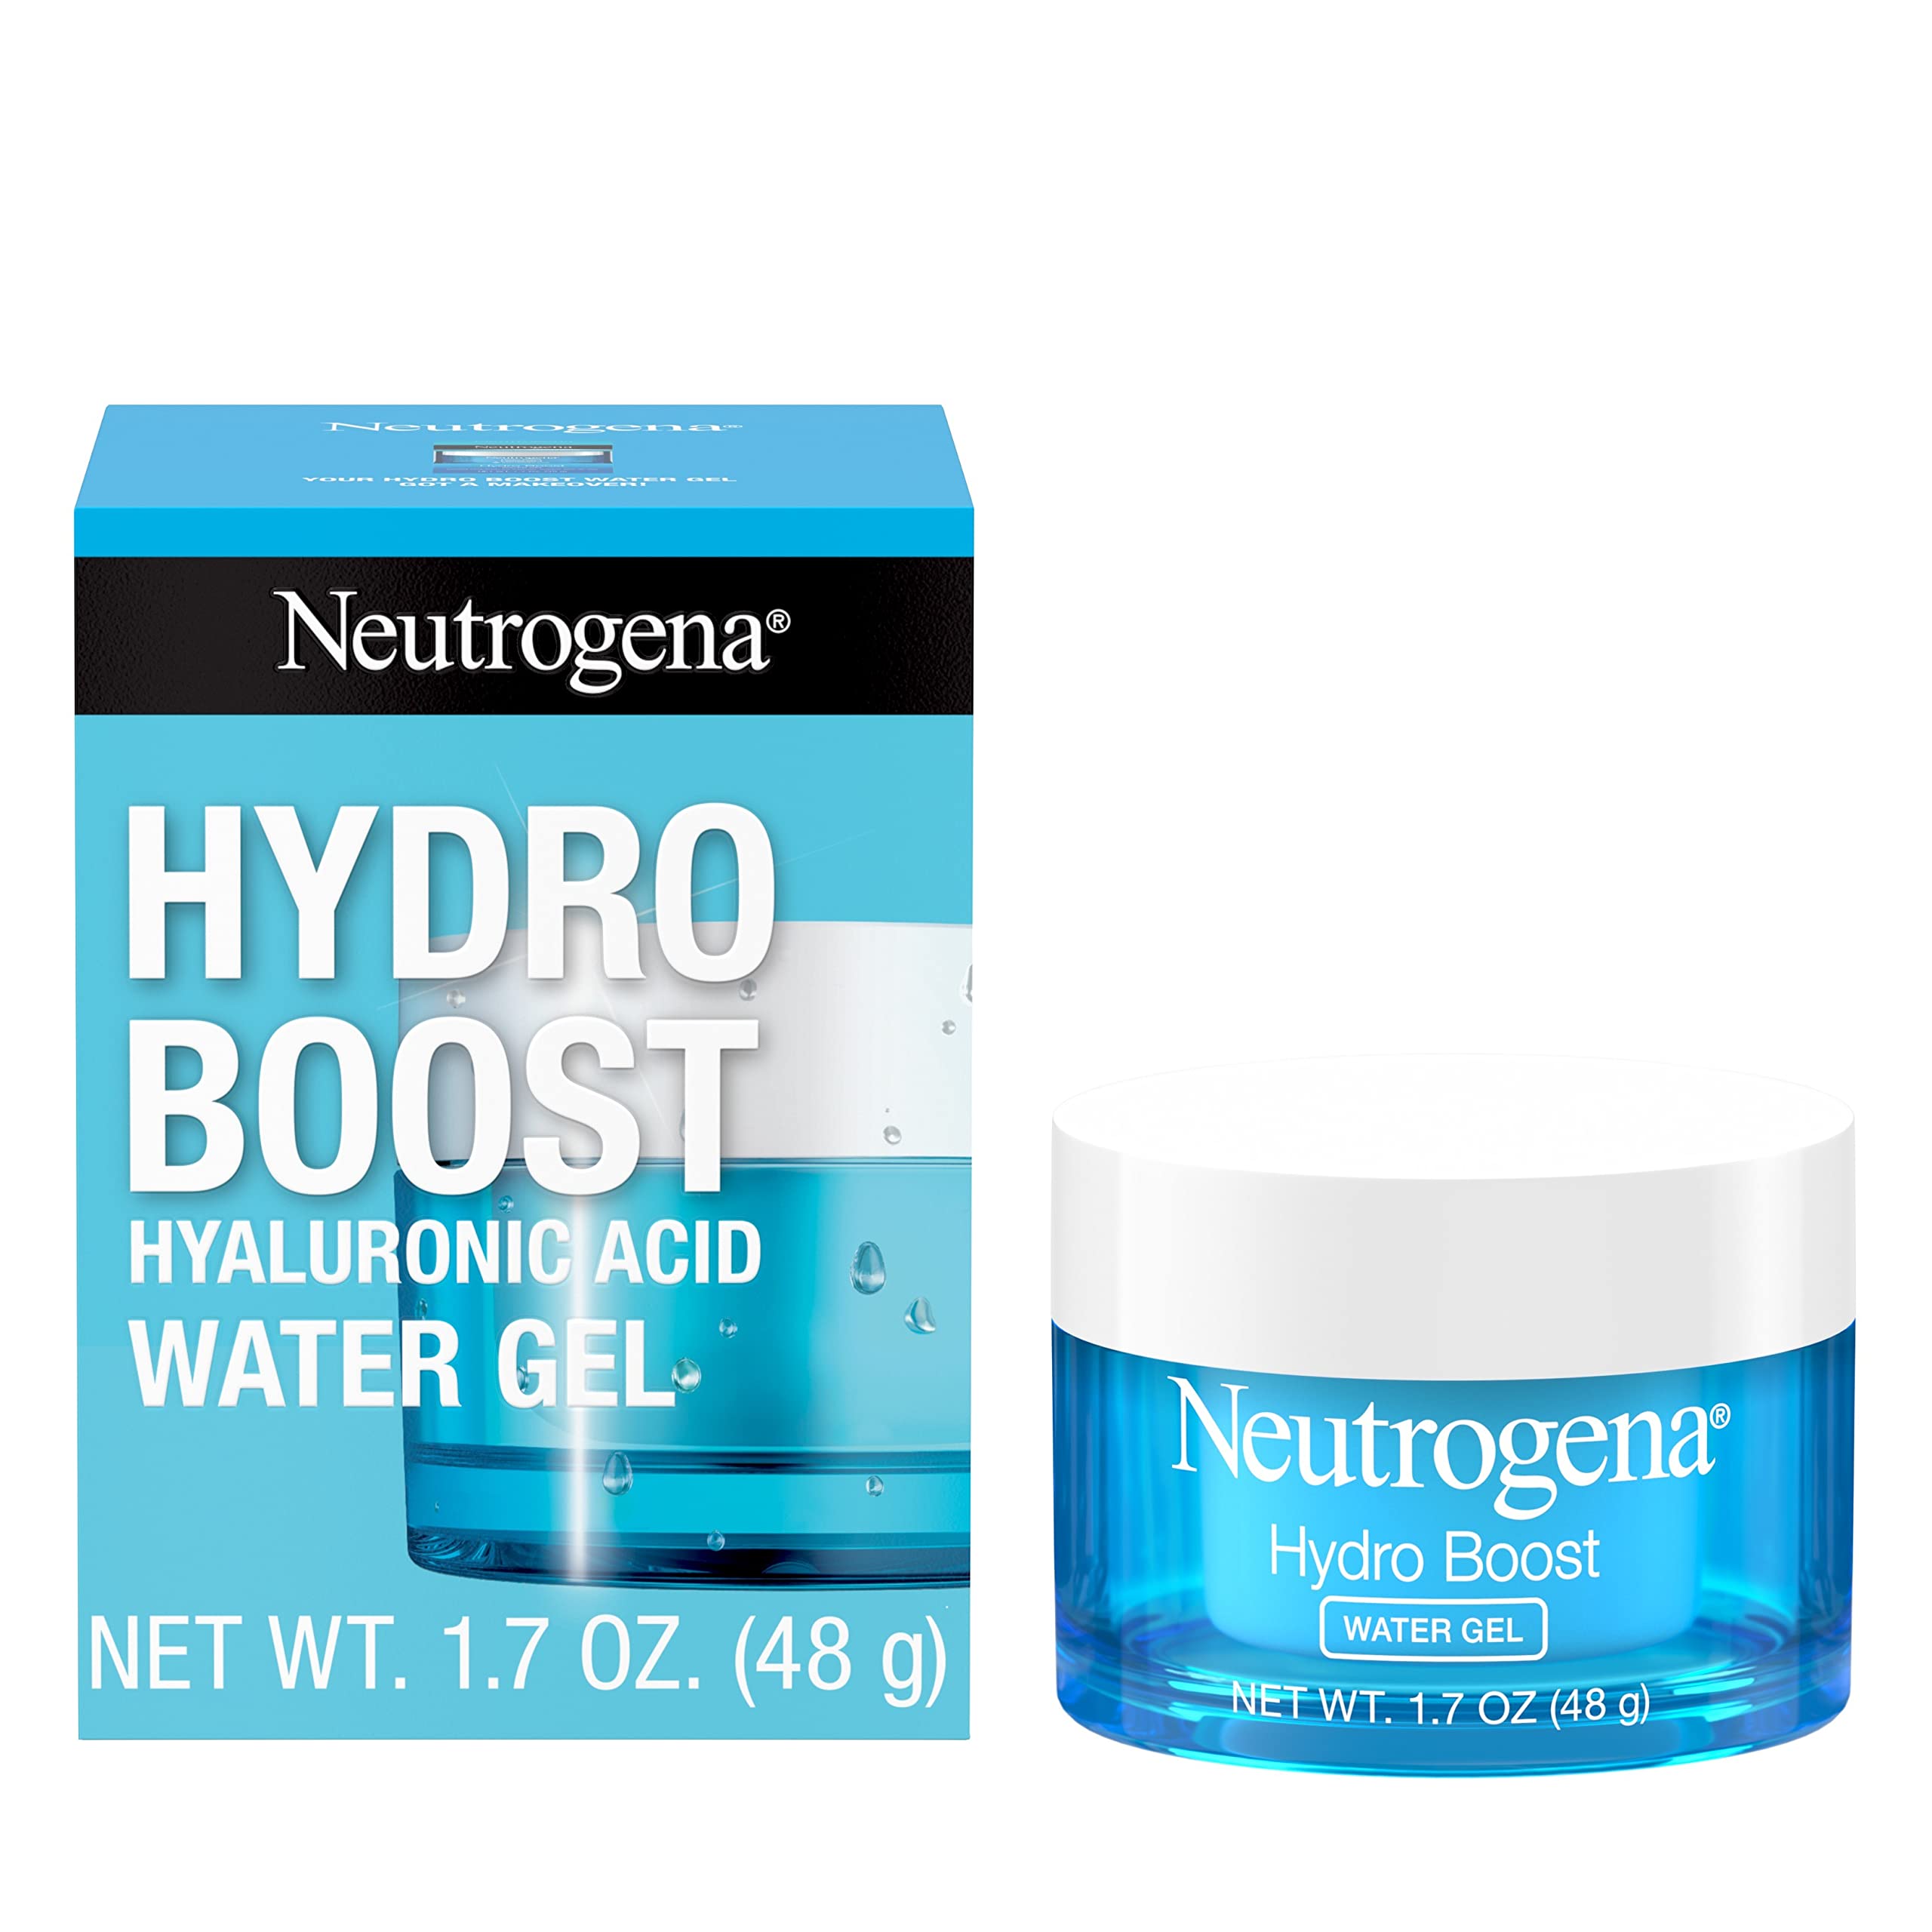 1.7-Oz Neutrogena Hydro Boost Hyaluronic Acid Hydrating Water Gel Daily Face Moisturizer $12.74 w/ S&S + Free Shipping w/ Prime or Orders $35+